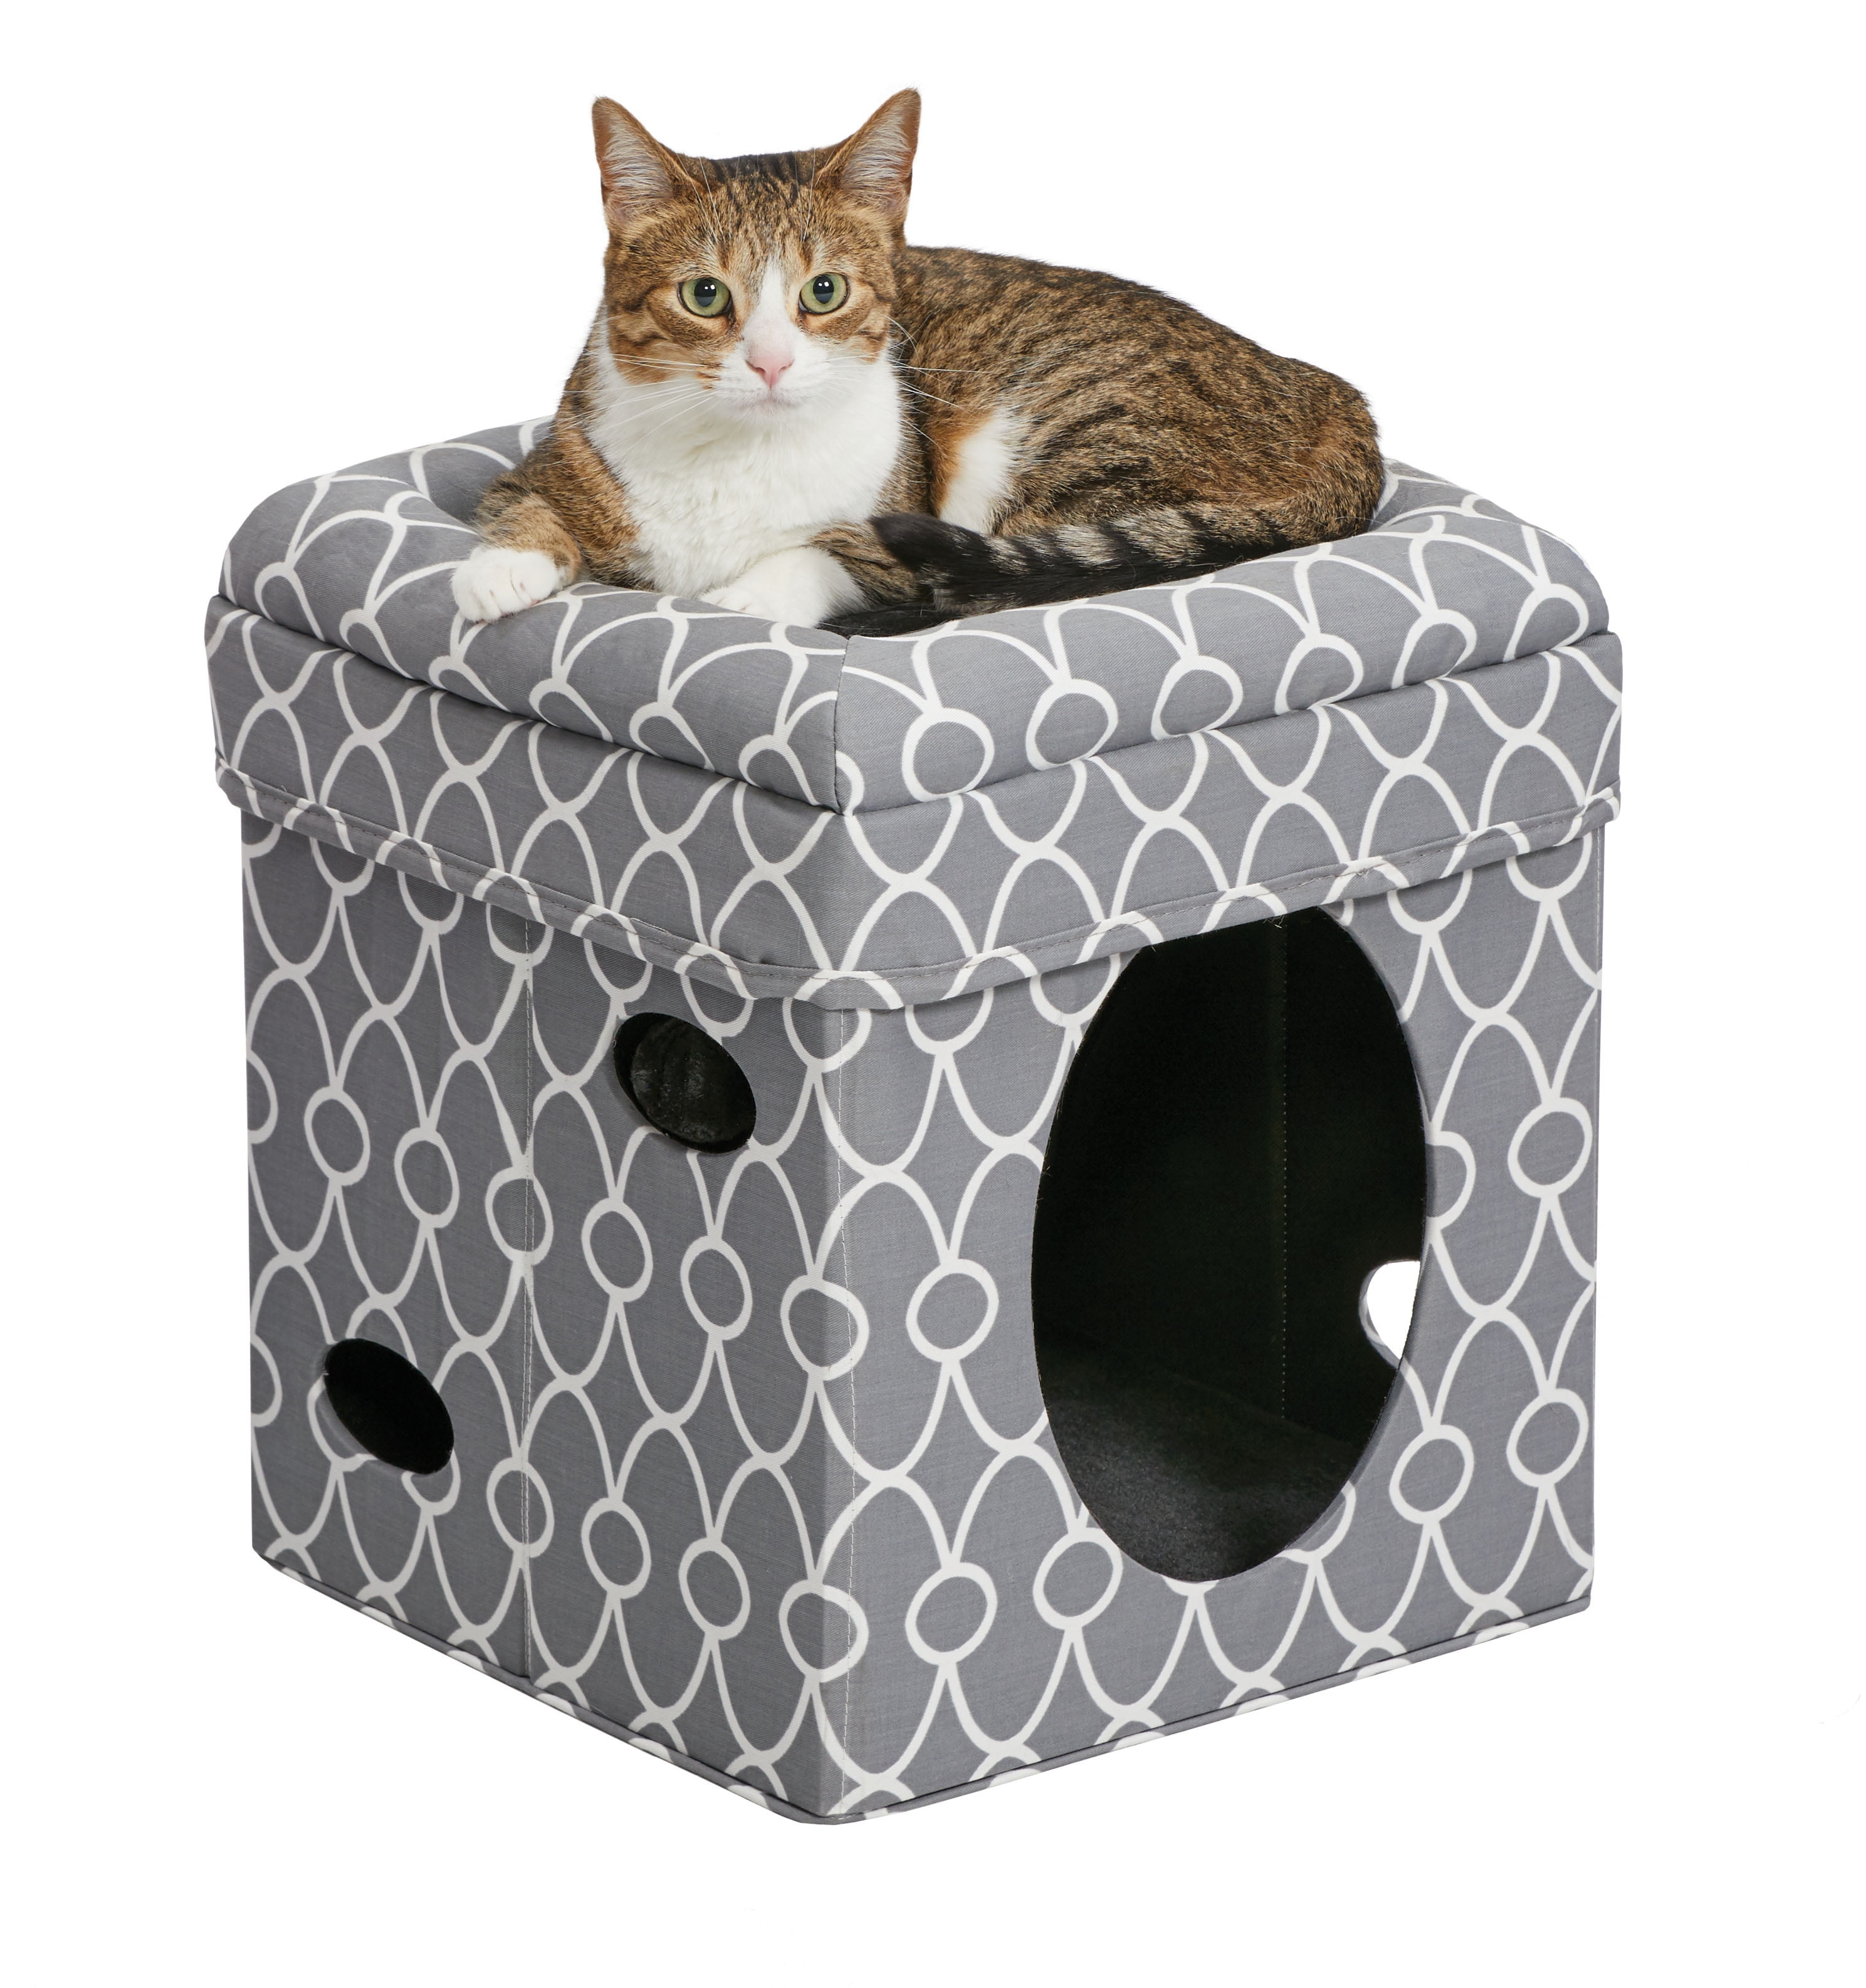 Mw02307 Curious Cube Cat Bed - Gray